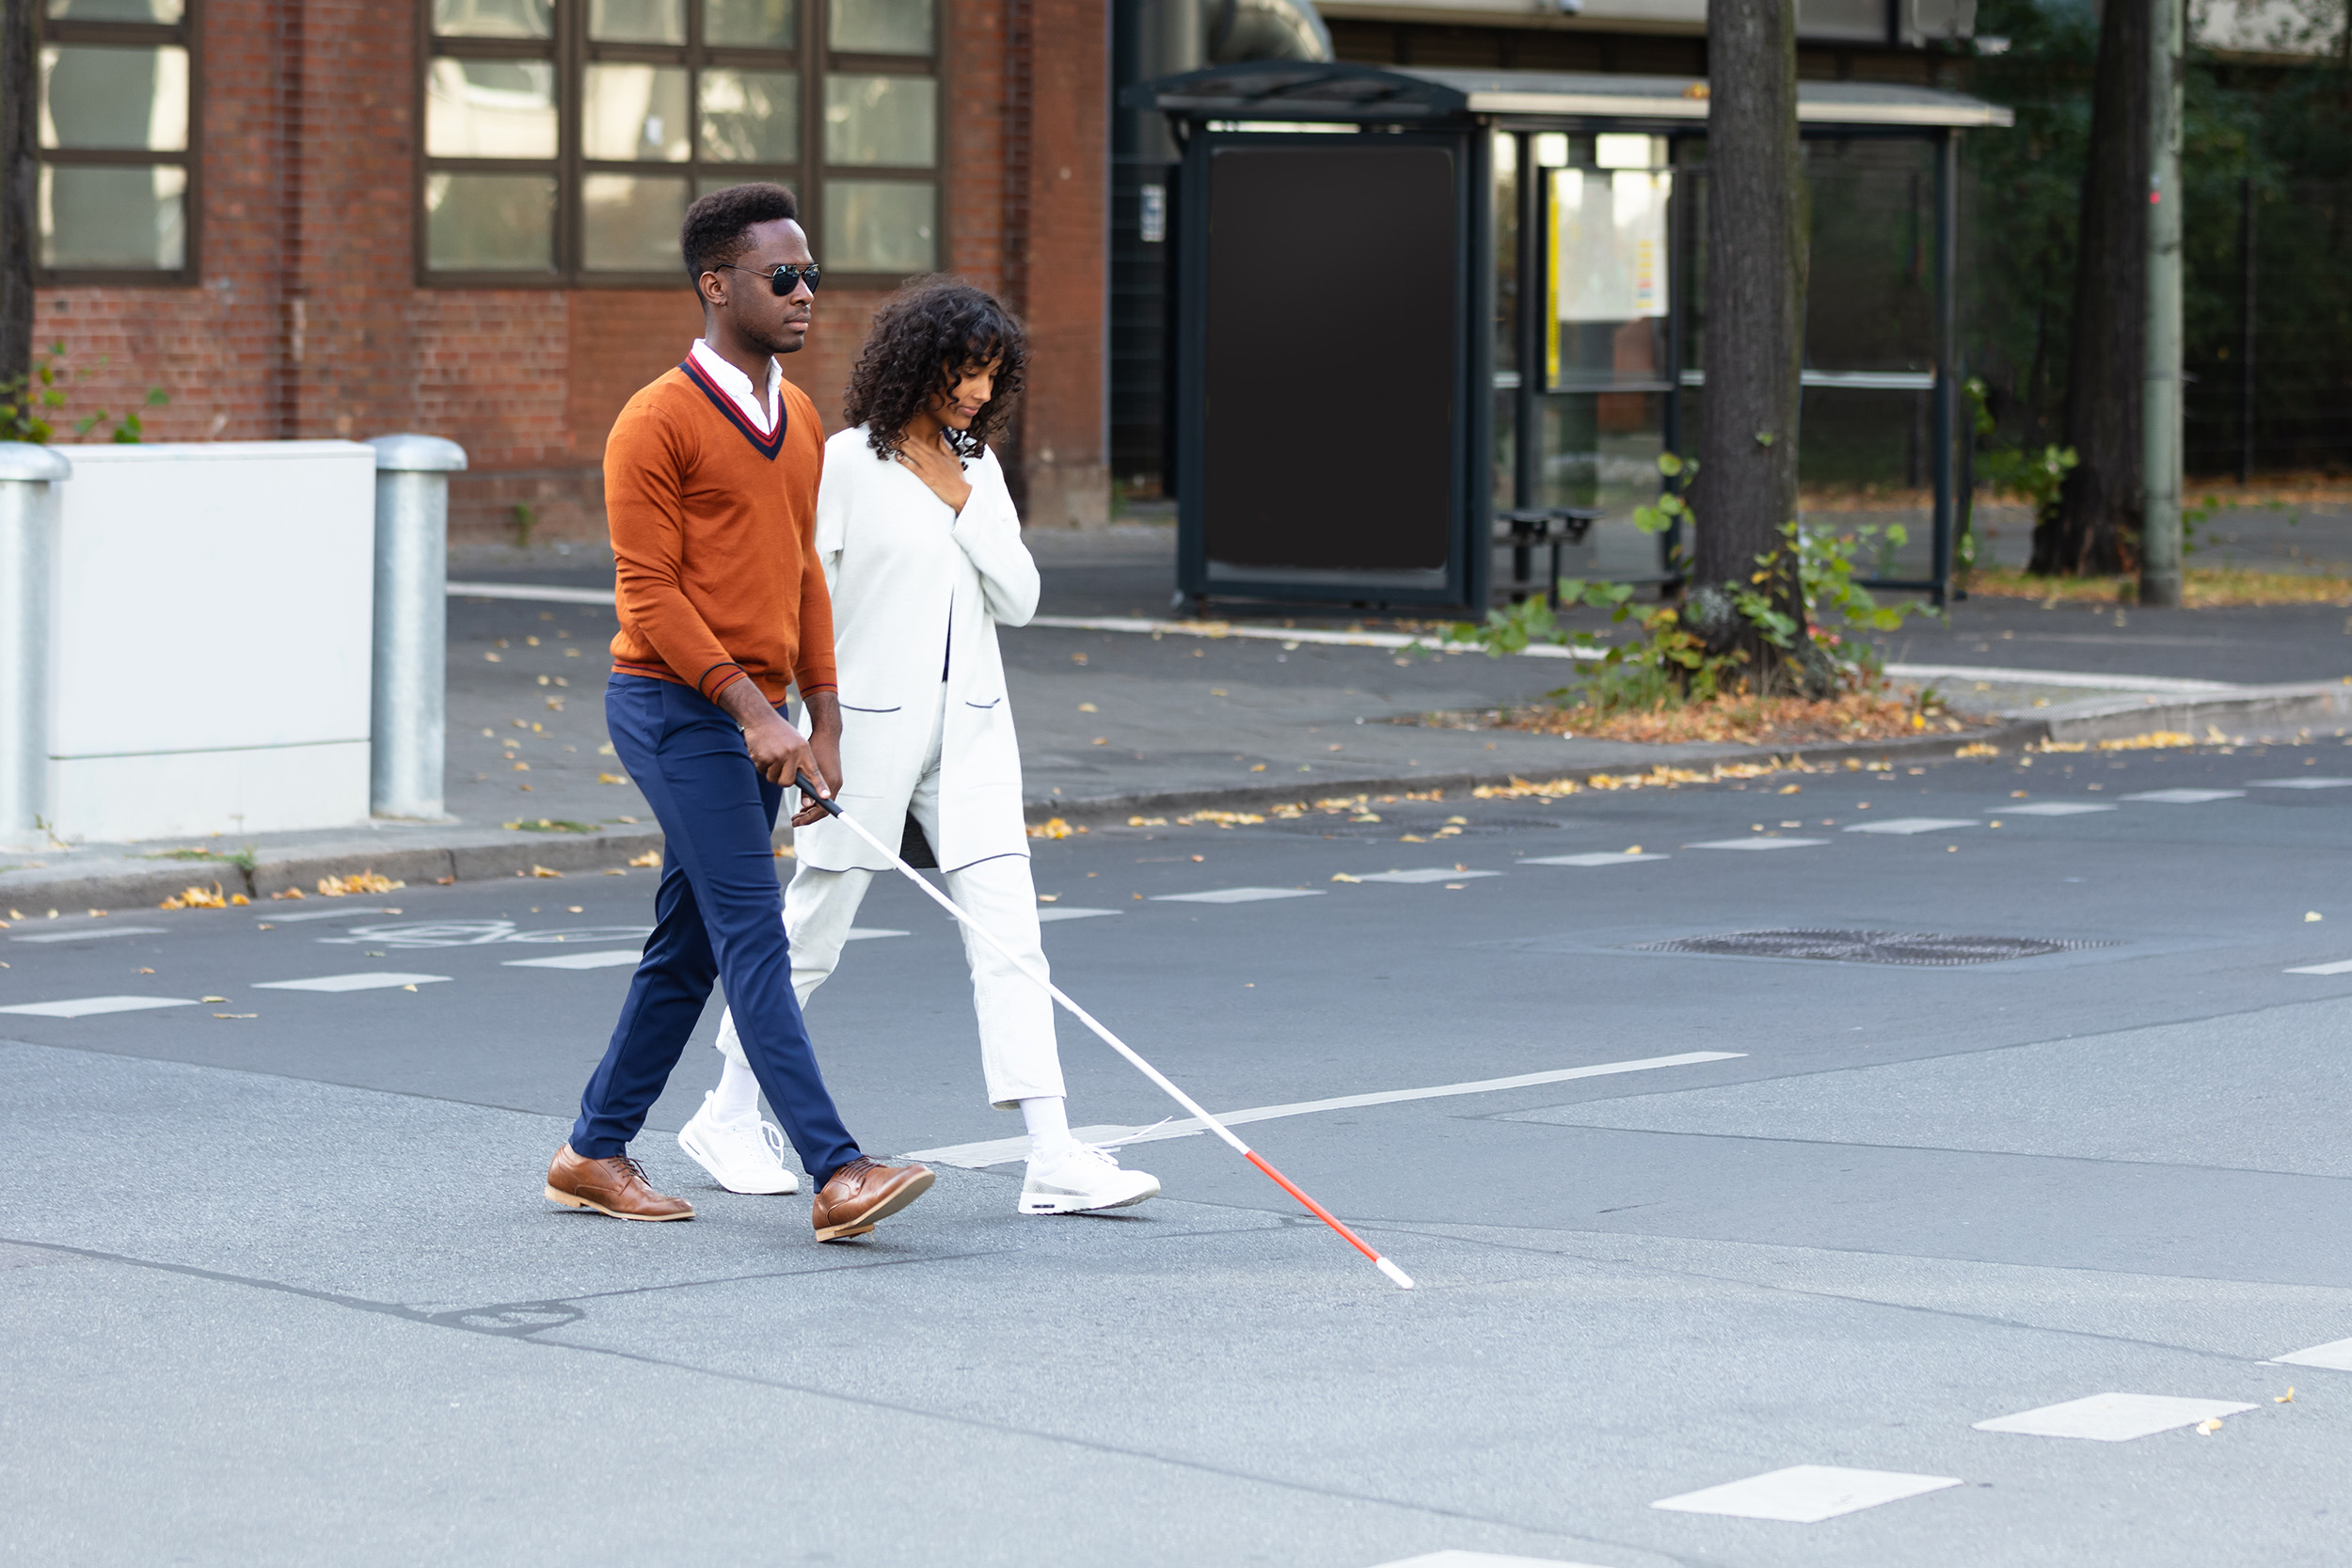 A Blind man in an orange sweater uses his cane to cross the street under the supervision of the Orientation & Mobility Specialist walking with him